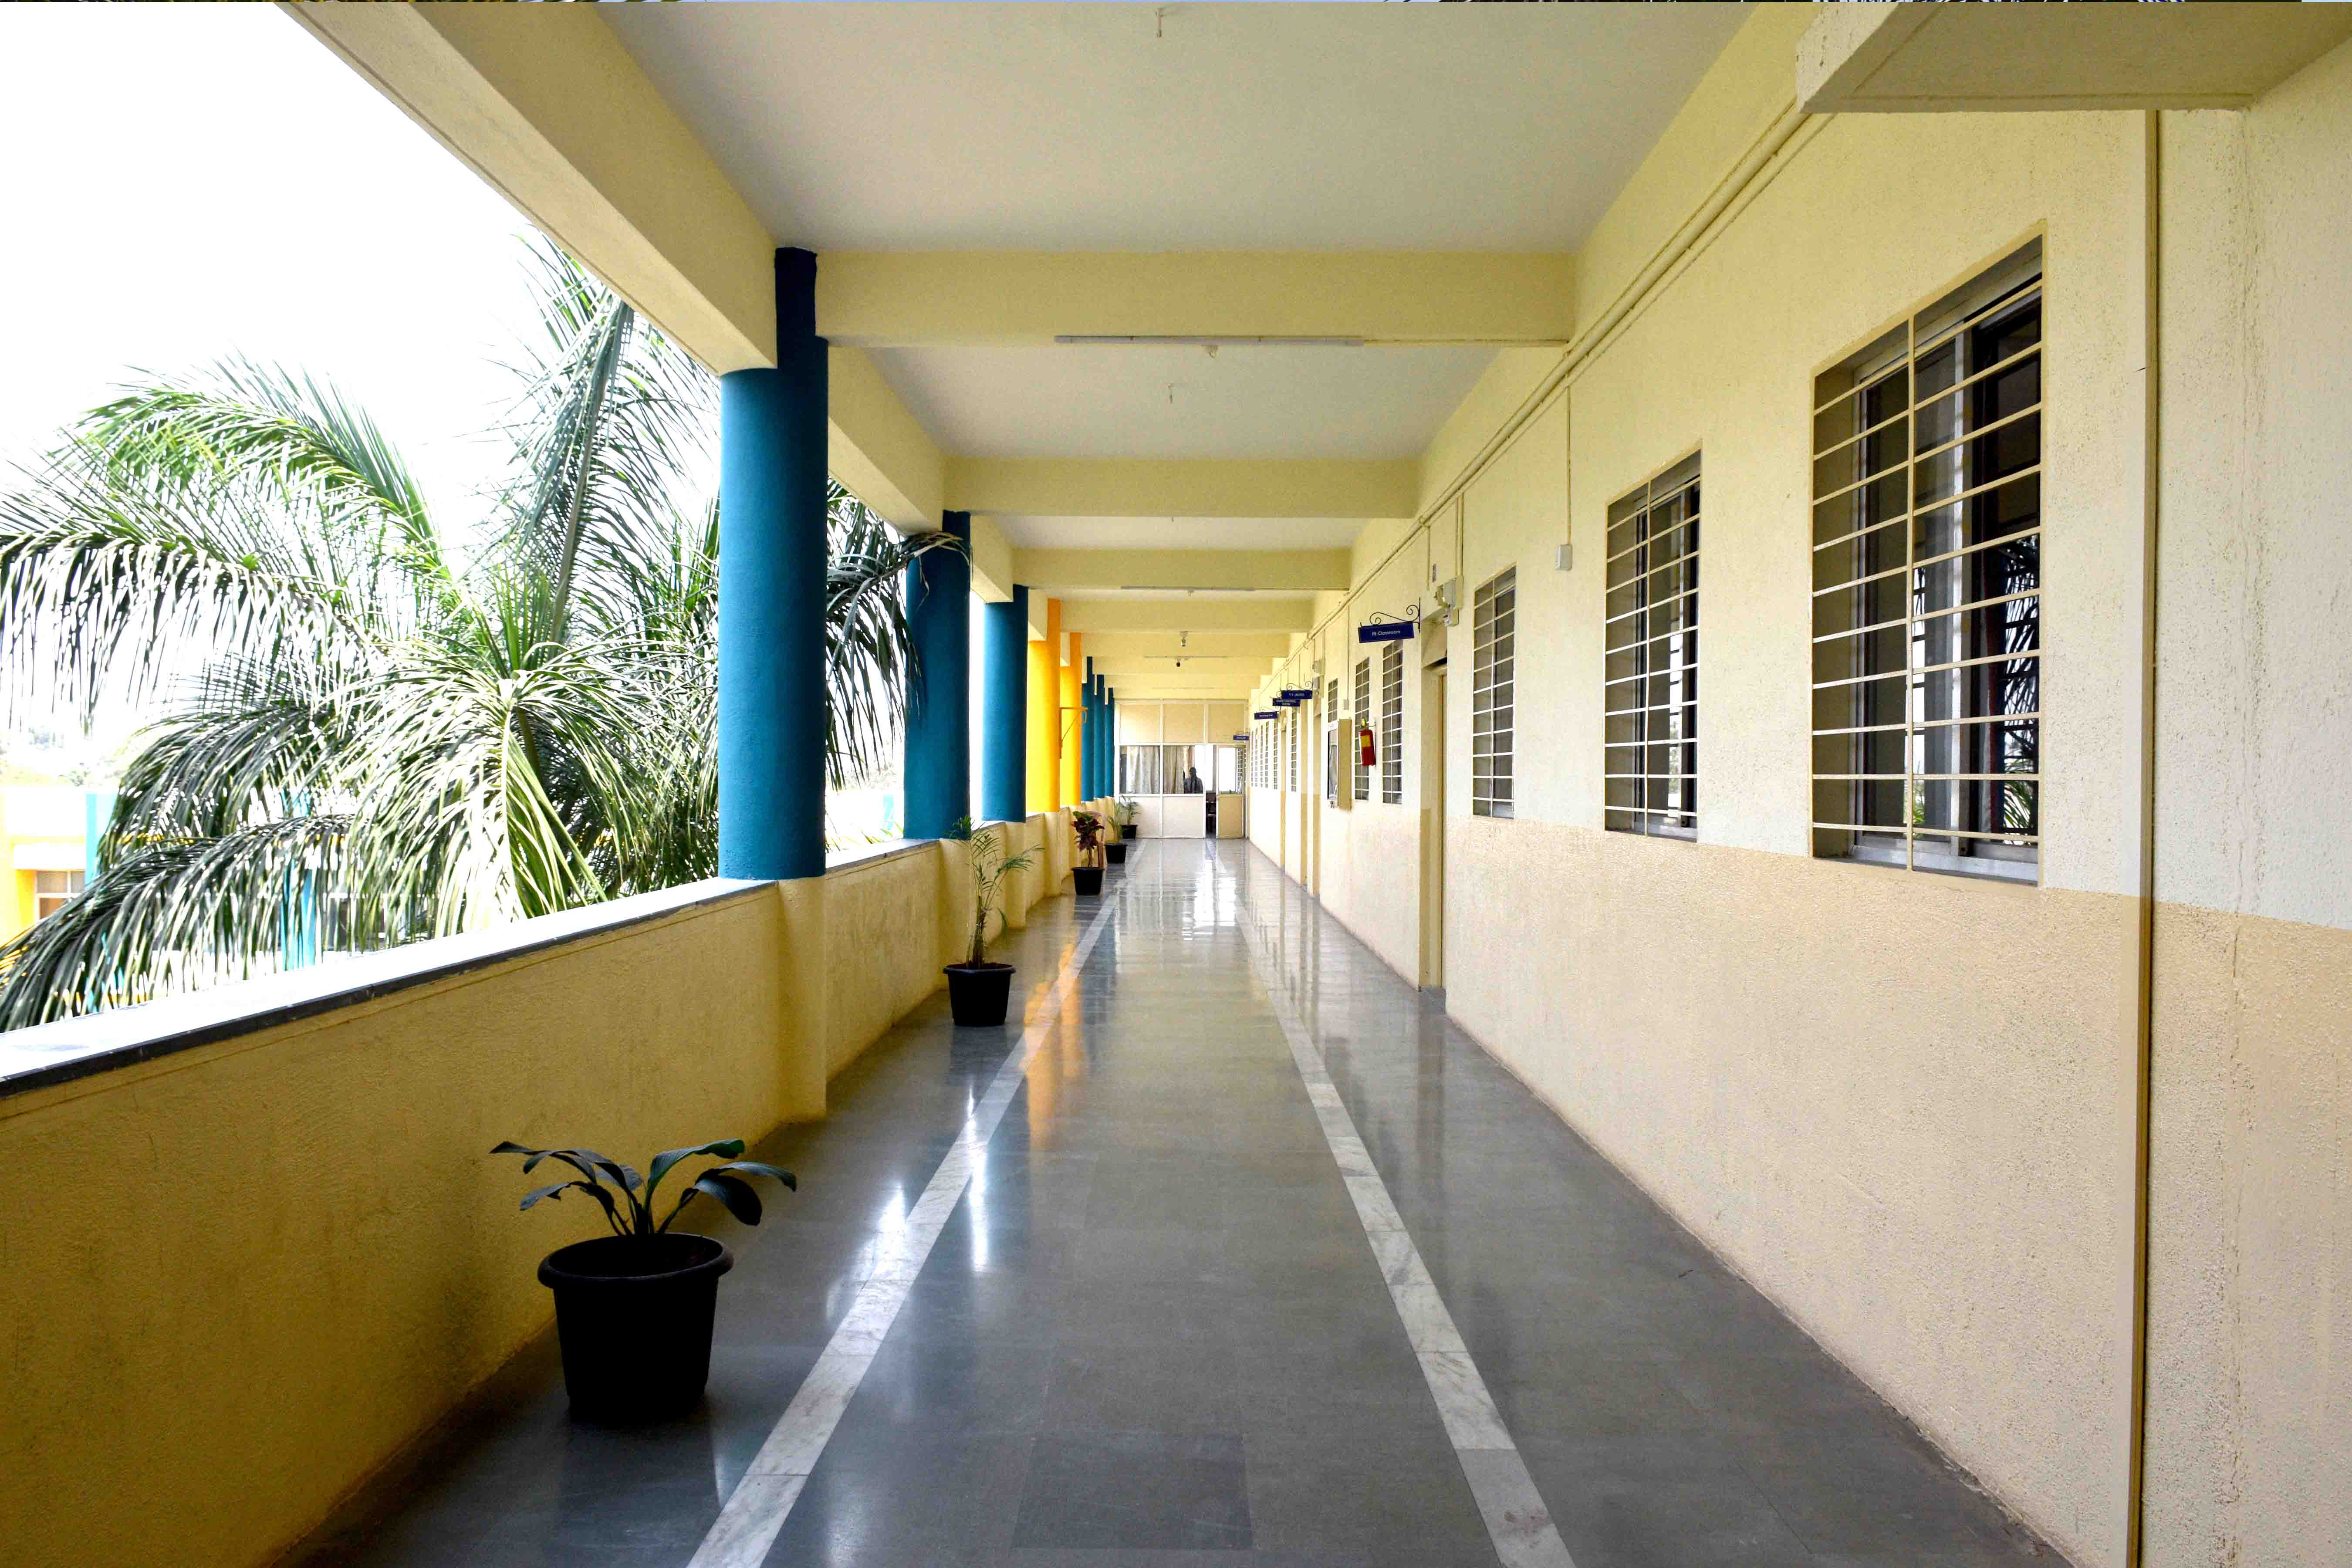 NCER college CAMPUS